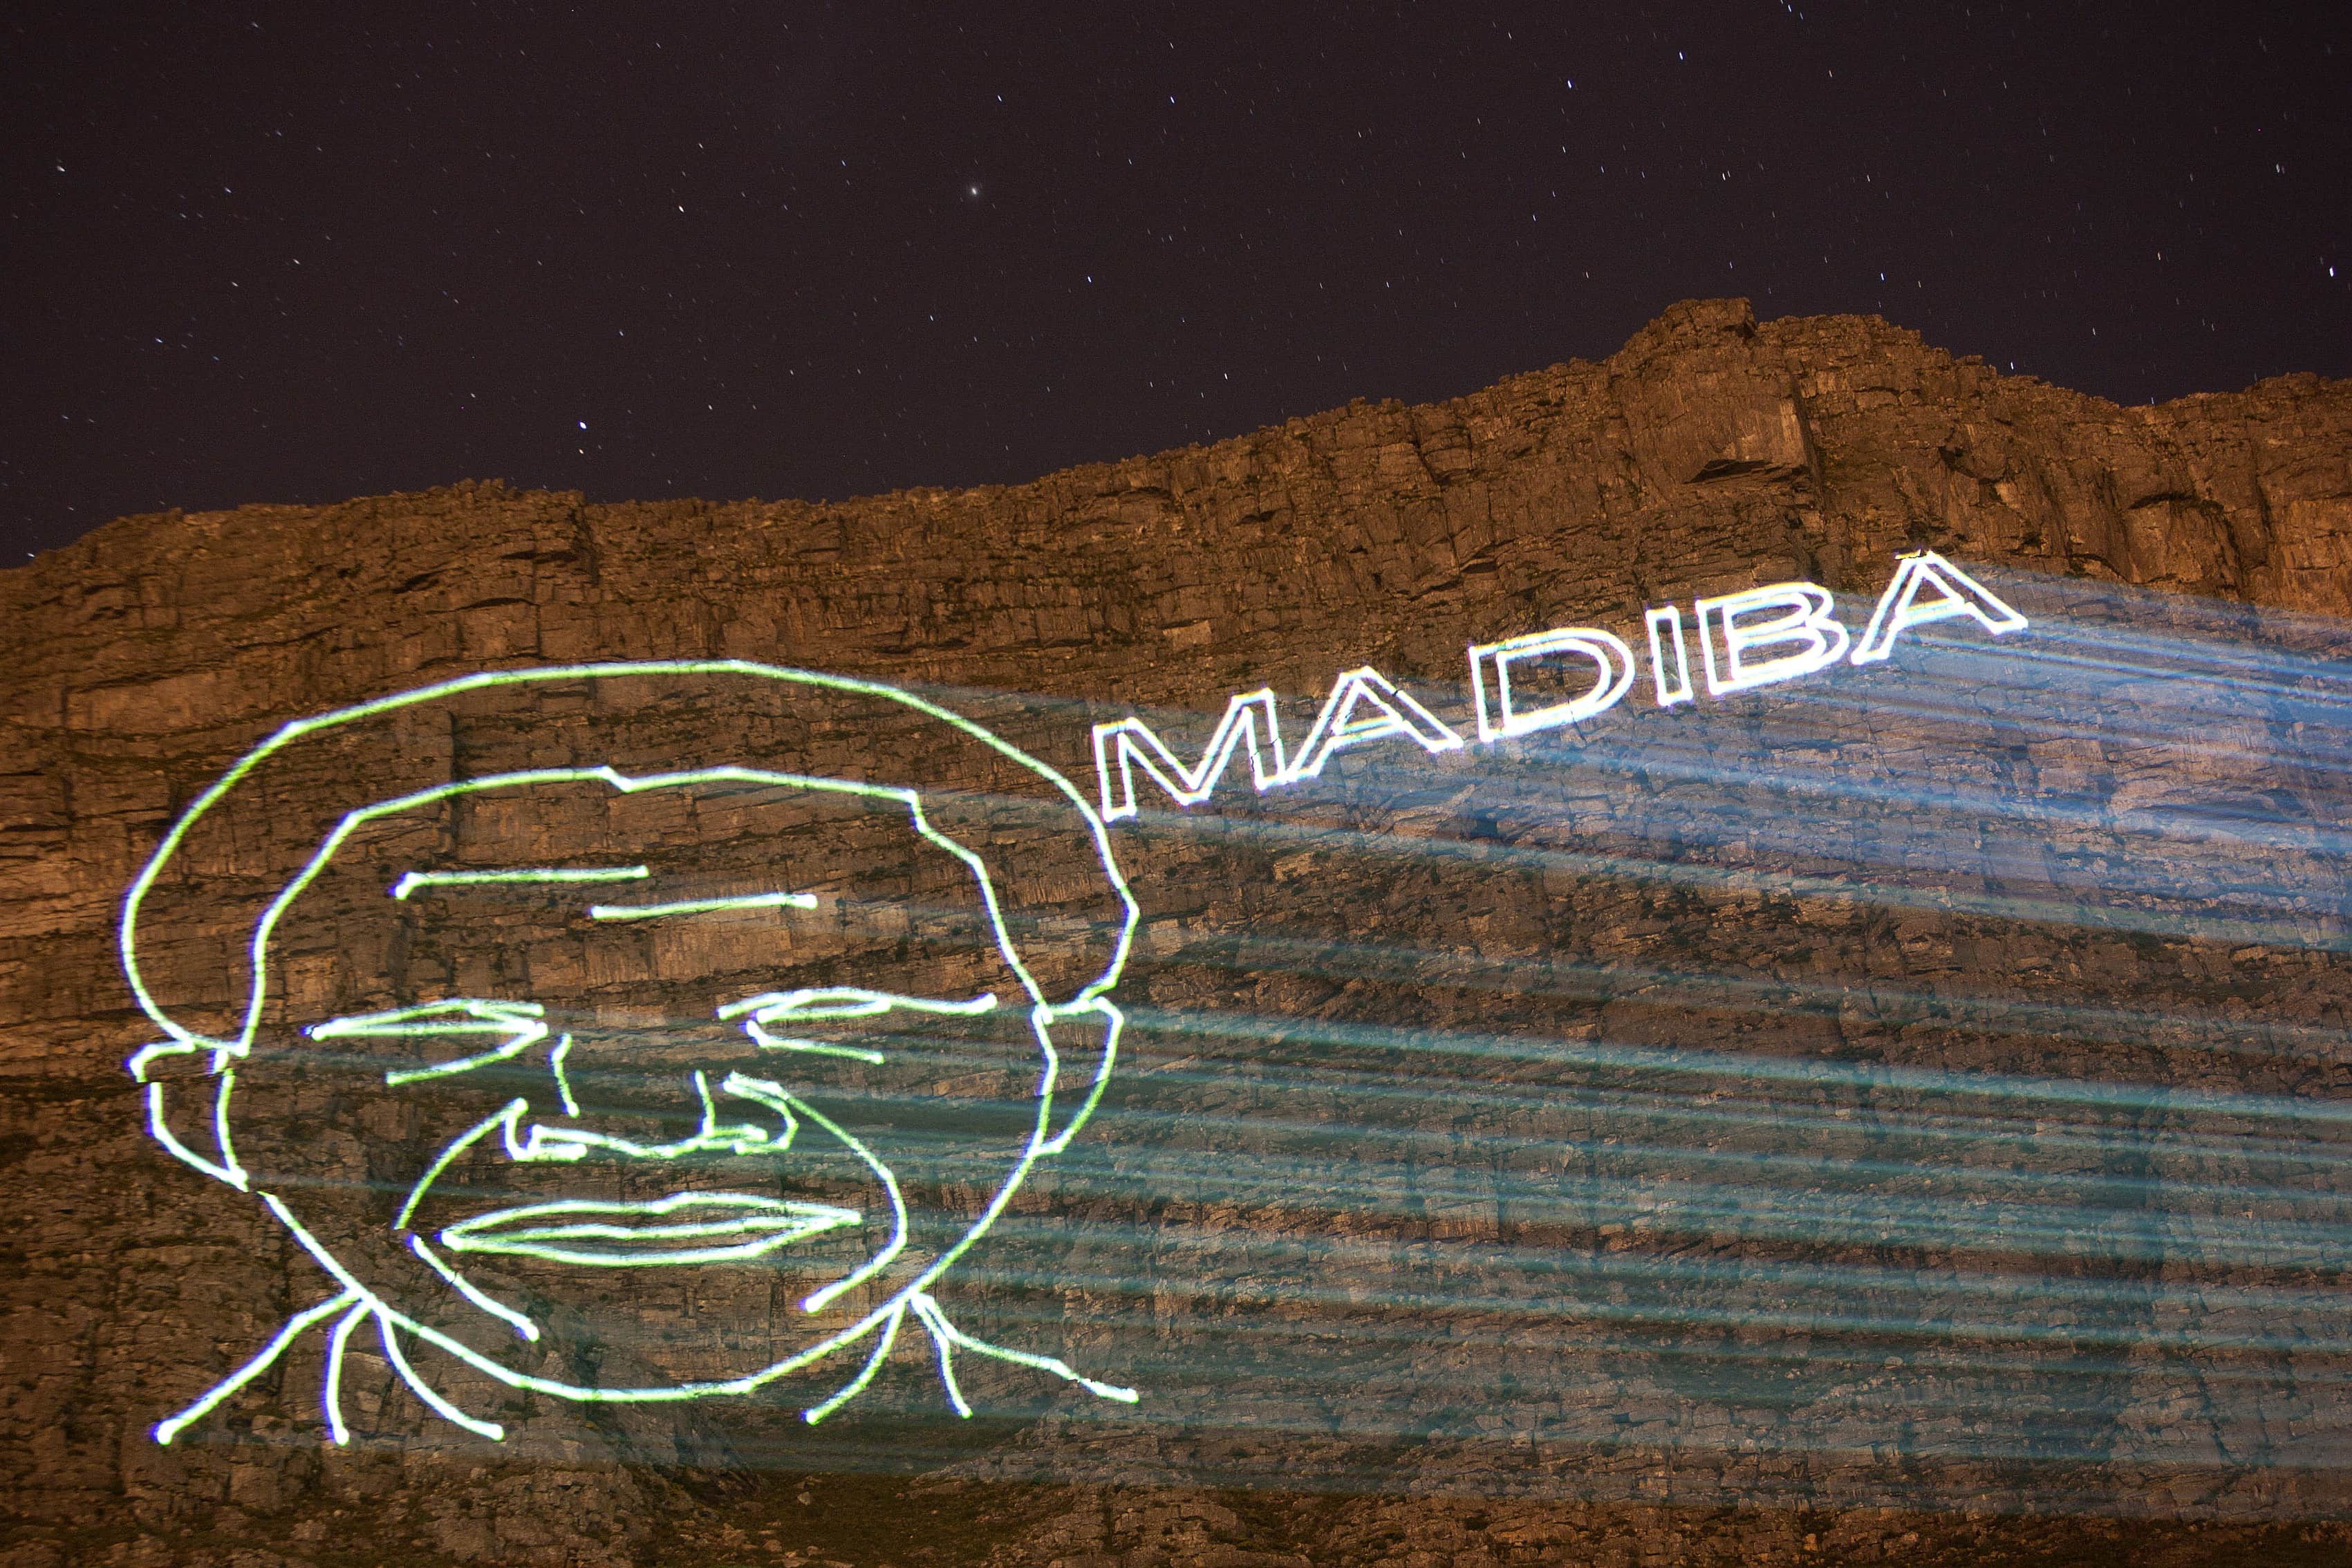 A projection of the face of former South African President Nelson Mandela and his clan name Madiba is projected onto the face of Table Mountain in Cape Town, 8 December 2013. , REUTERS/Mark Wessels